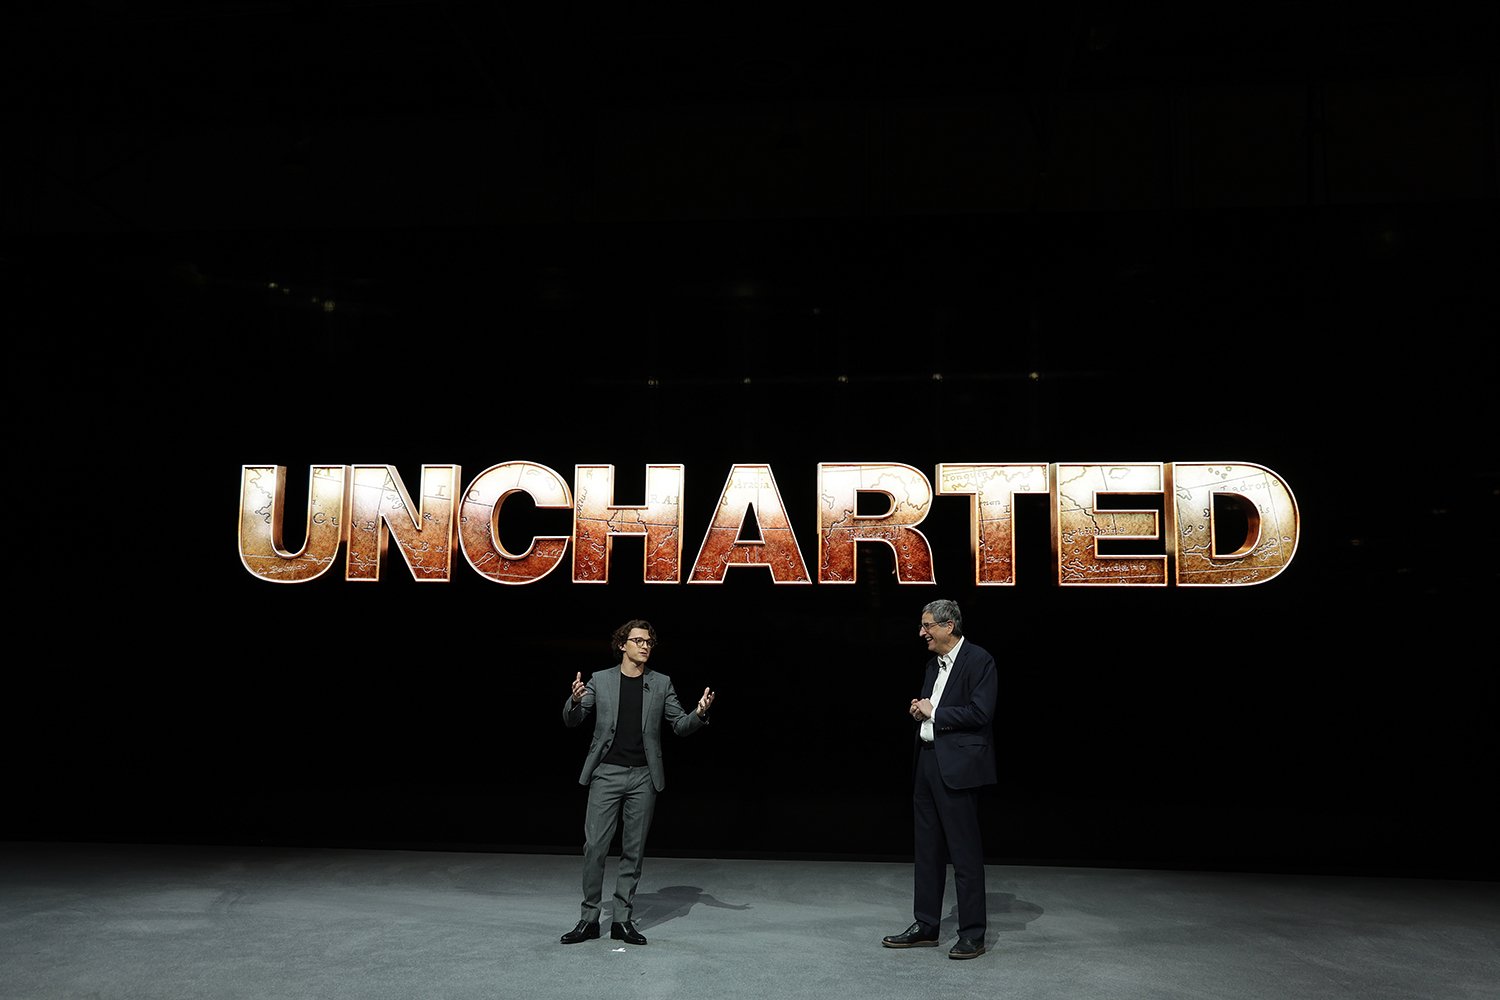 Uncharted movie finishes filming after more than a decade in